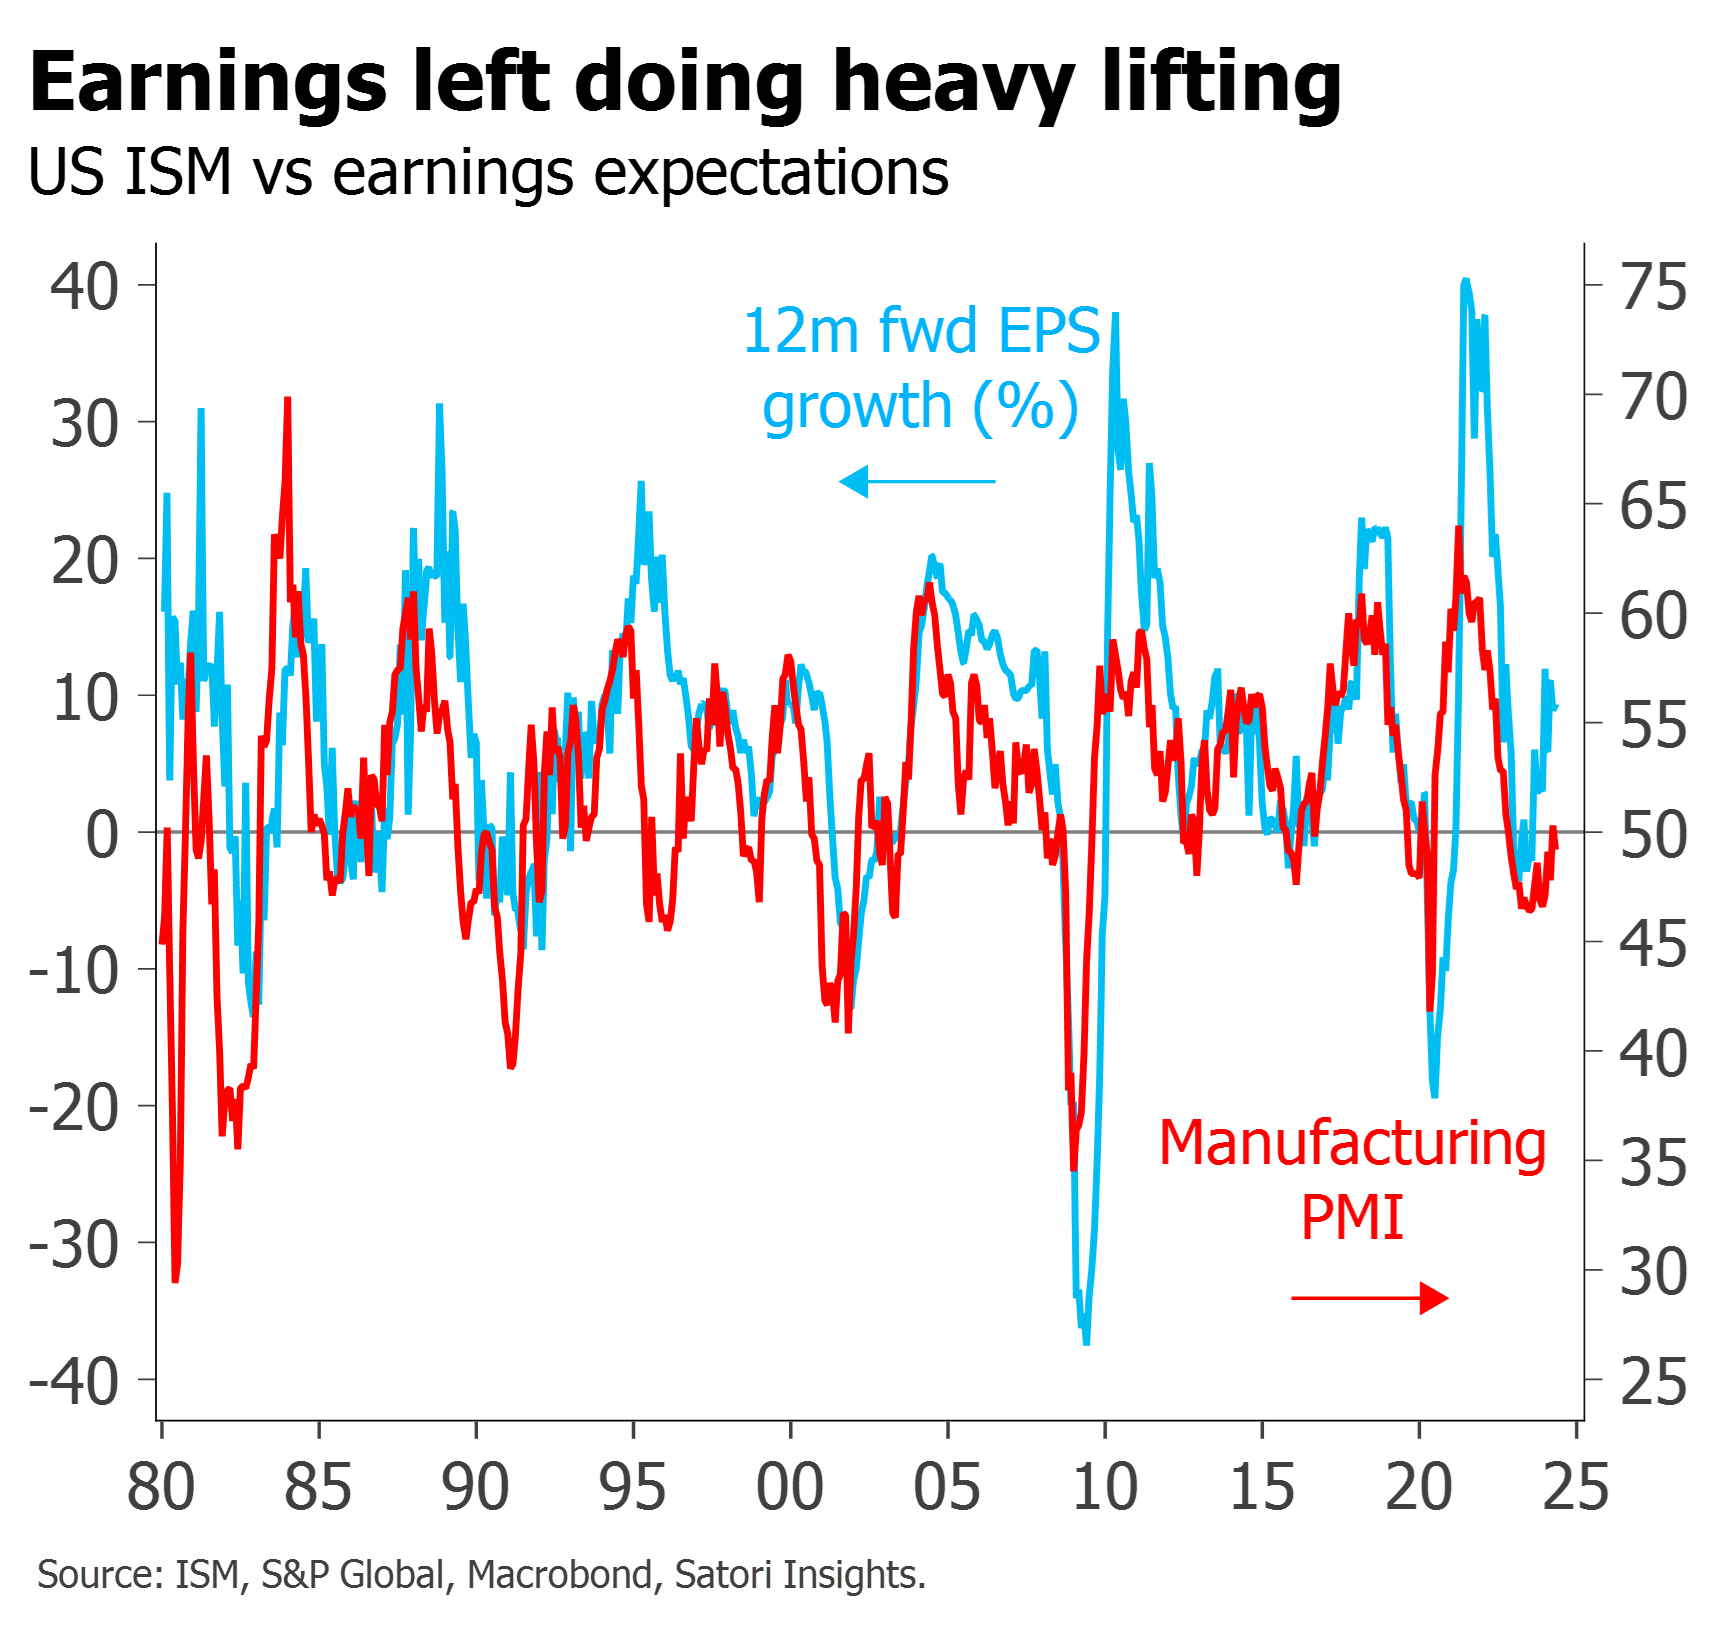 earnings expectations much higher than mfg pmi